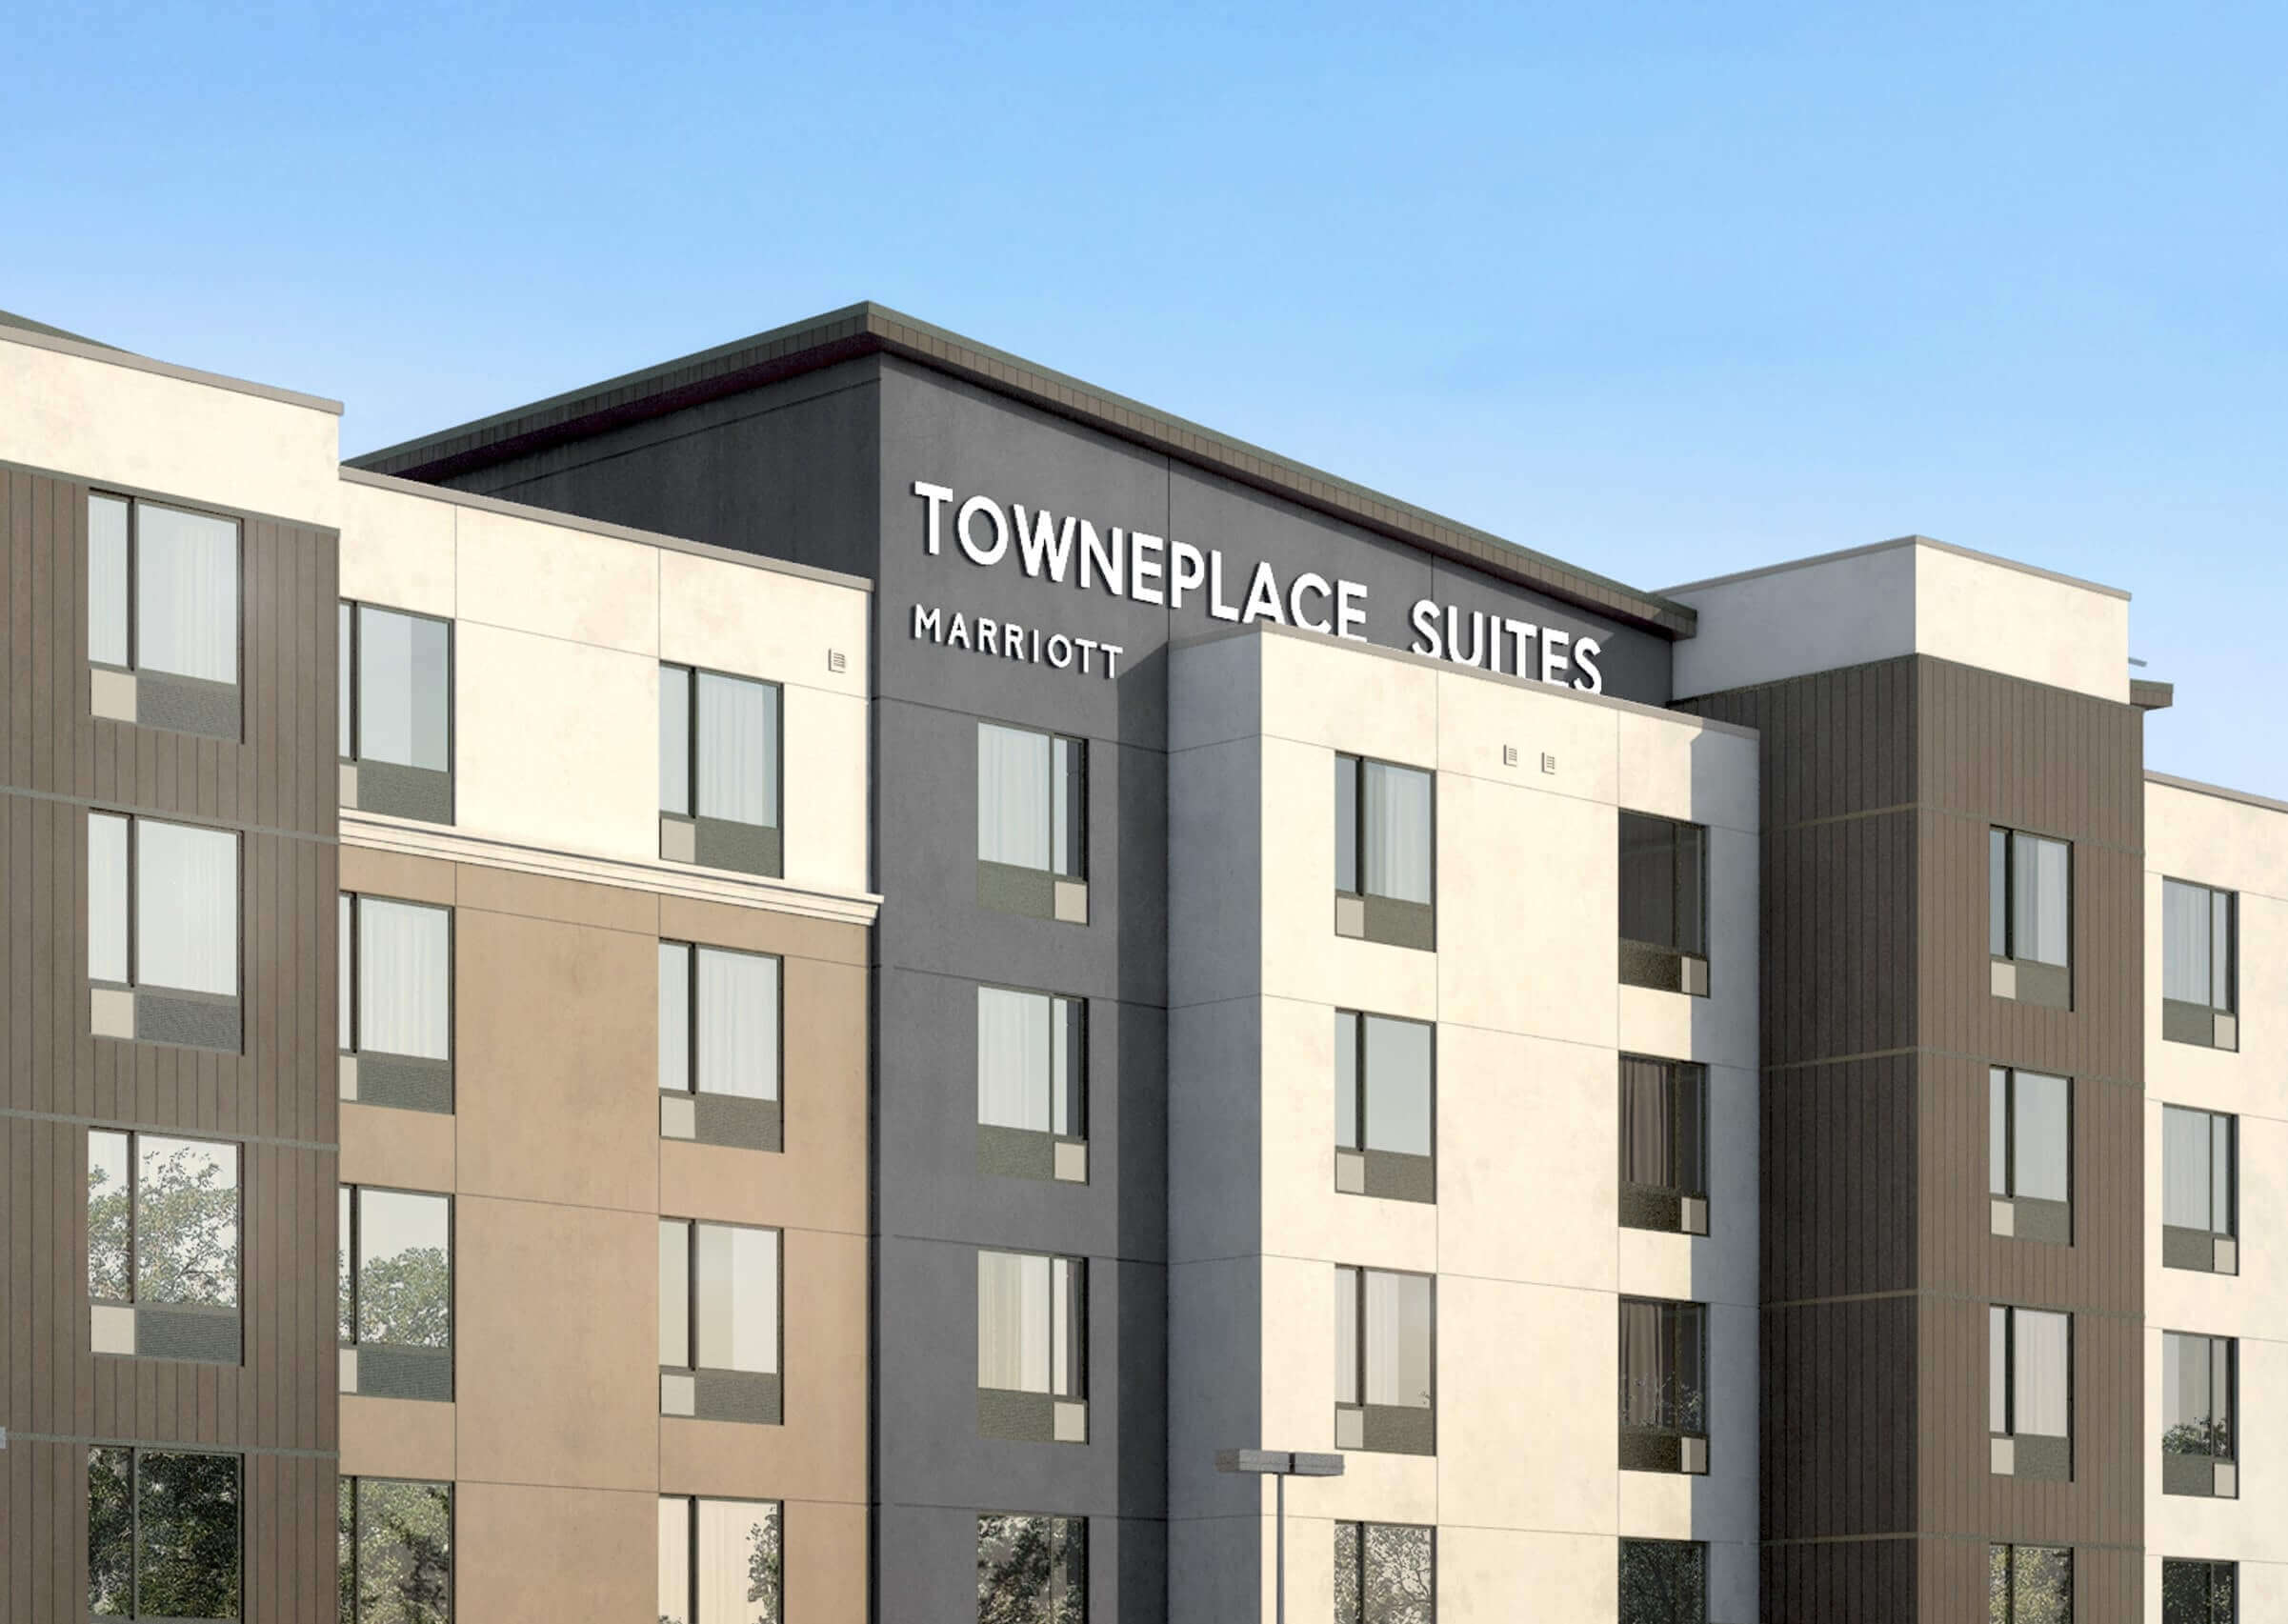 TownePlace Suites Under Construction in North Las Vegas